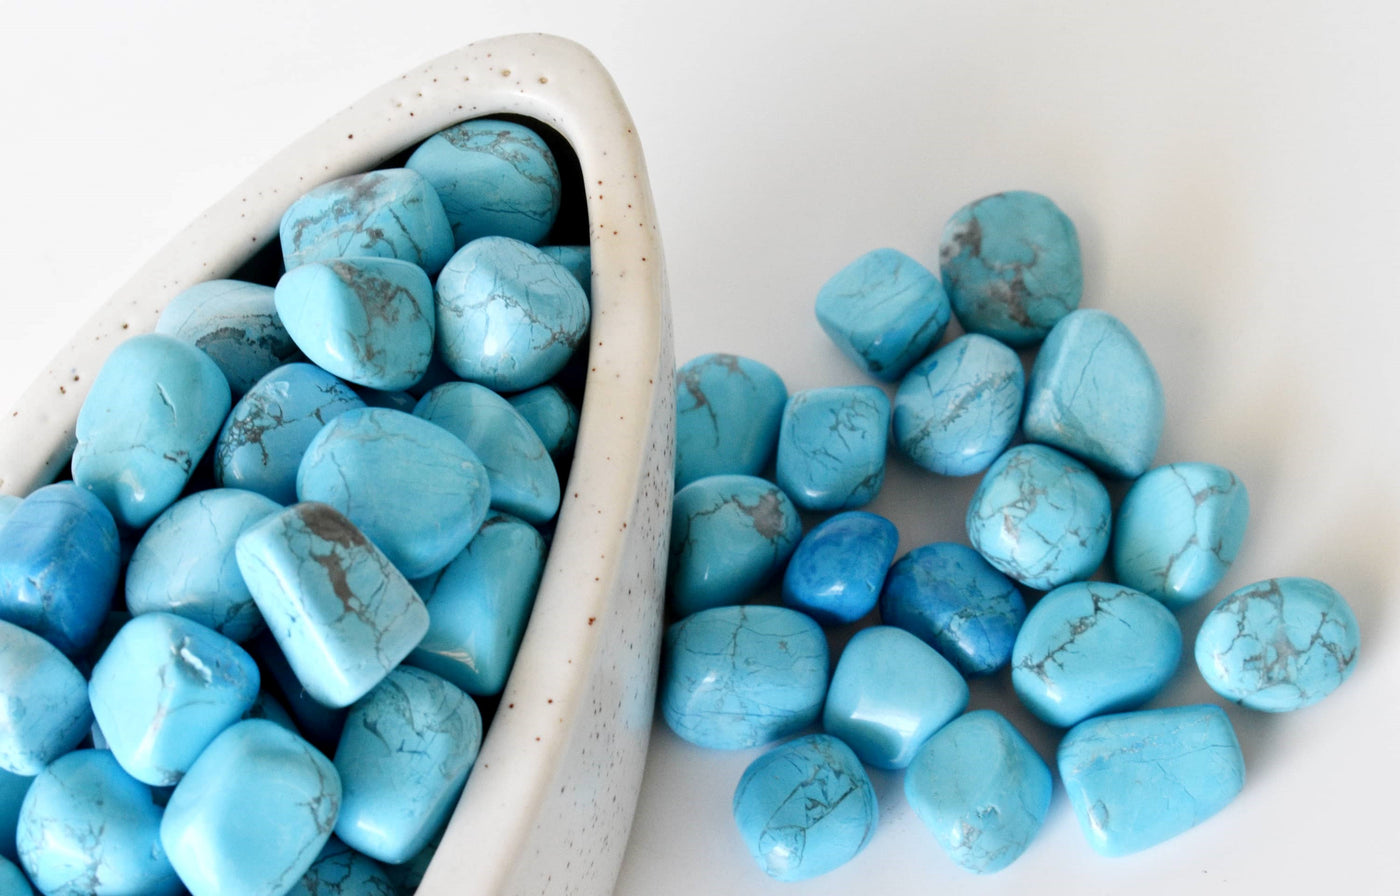 Turquoise Howlite Tumbled Crystals(Promotes Self-Realisation and Assists Creative Problem Solving)